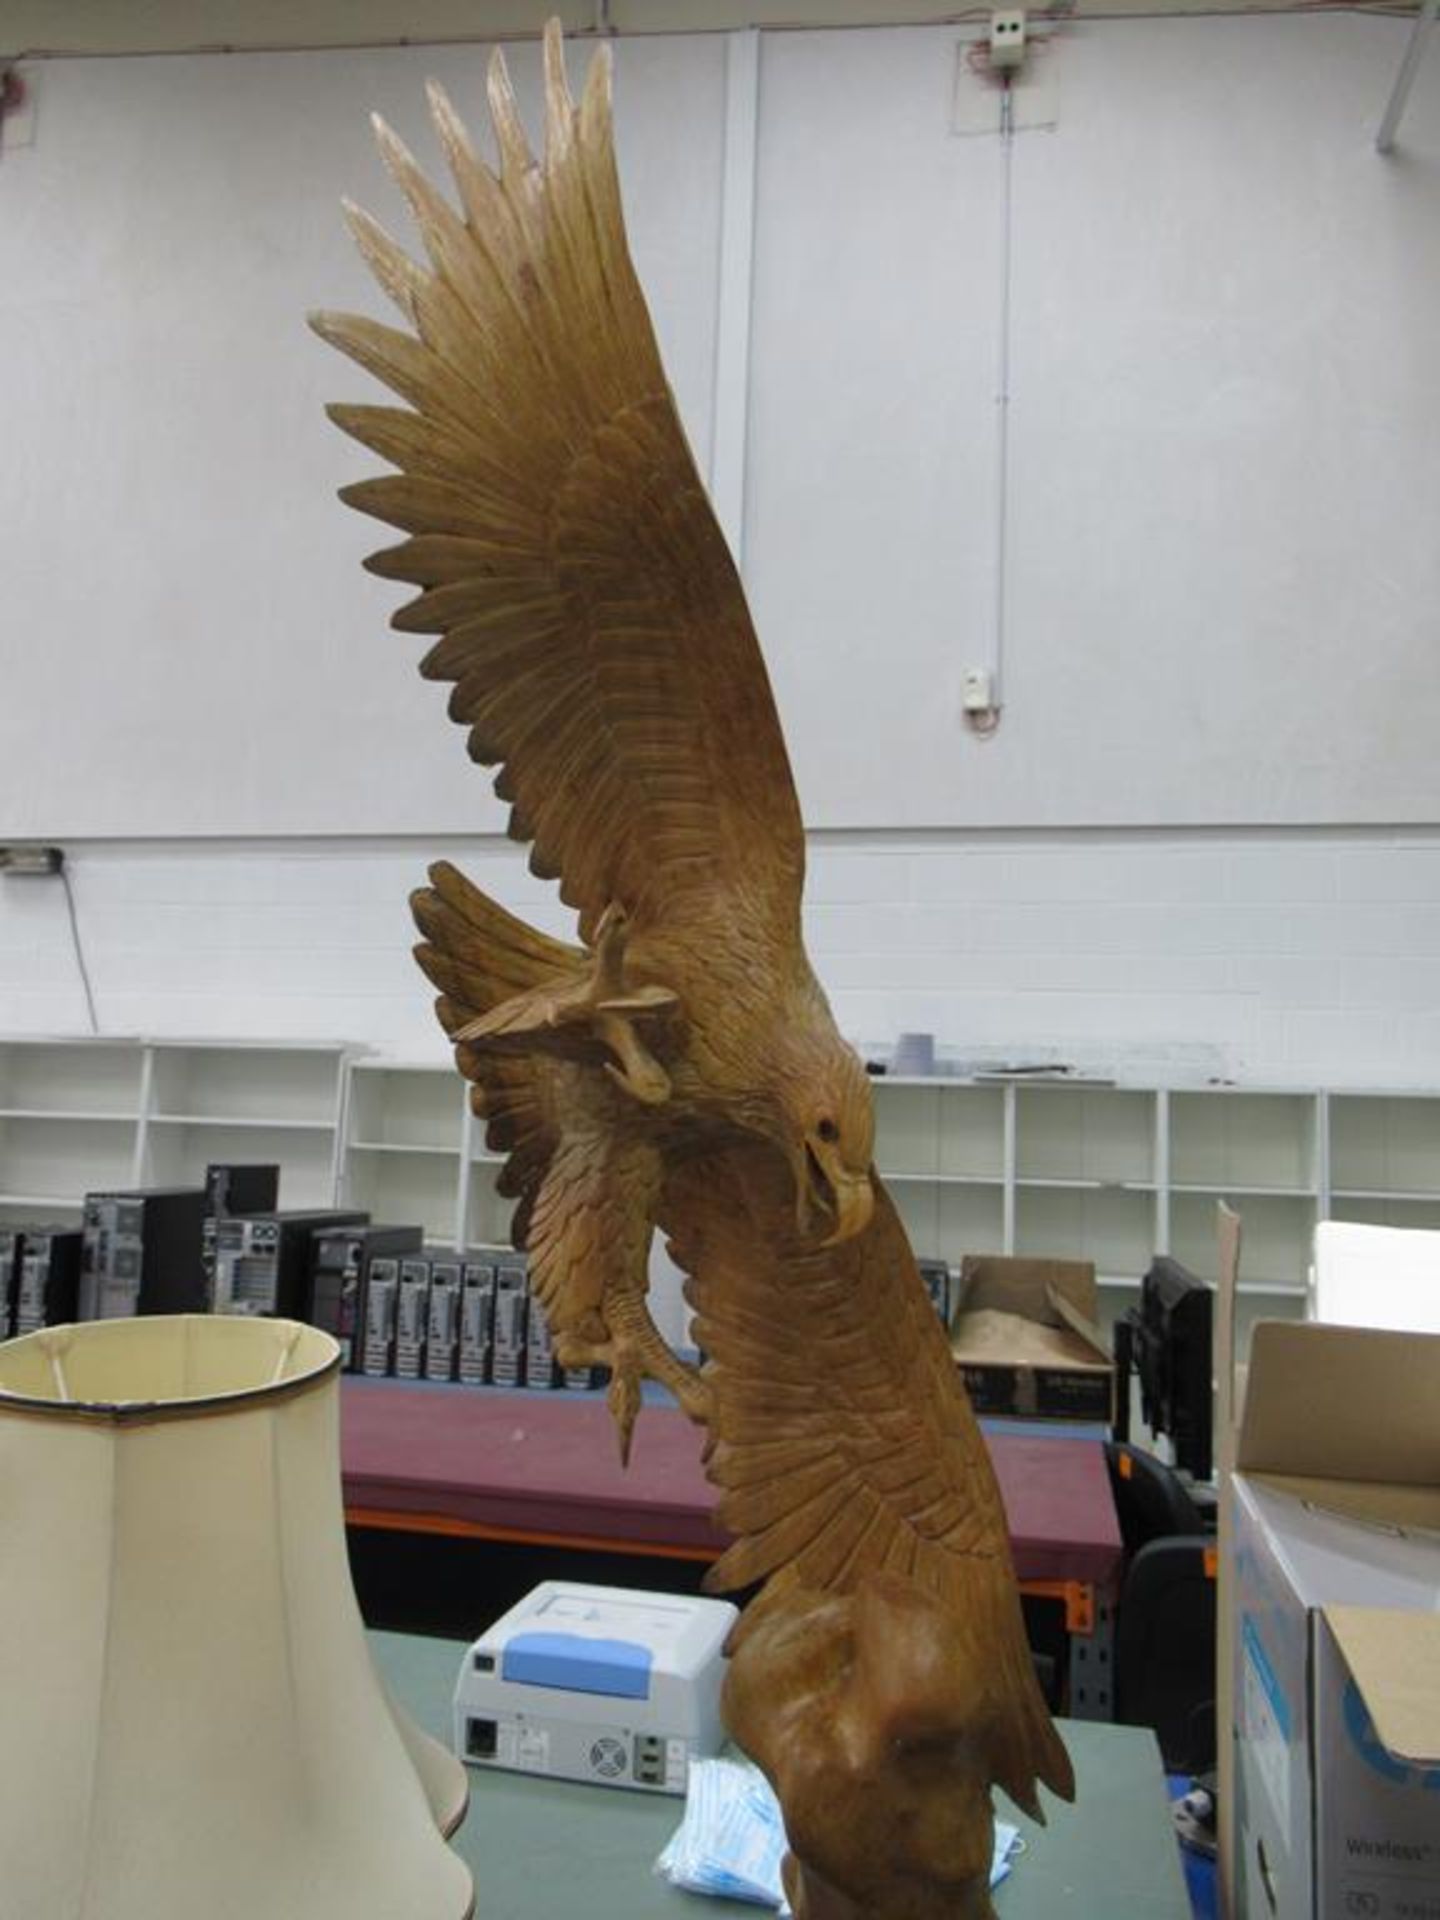 2x Carved Wooden Eagle Figures - 1x 4ft Tall - Image 6 of 16